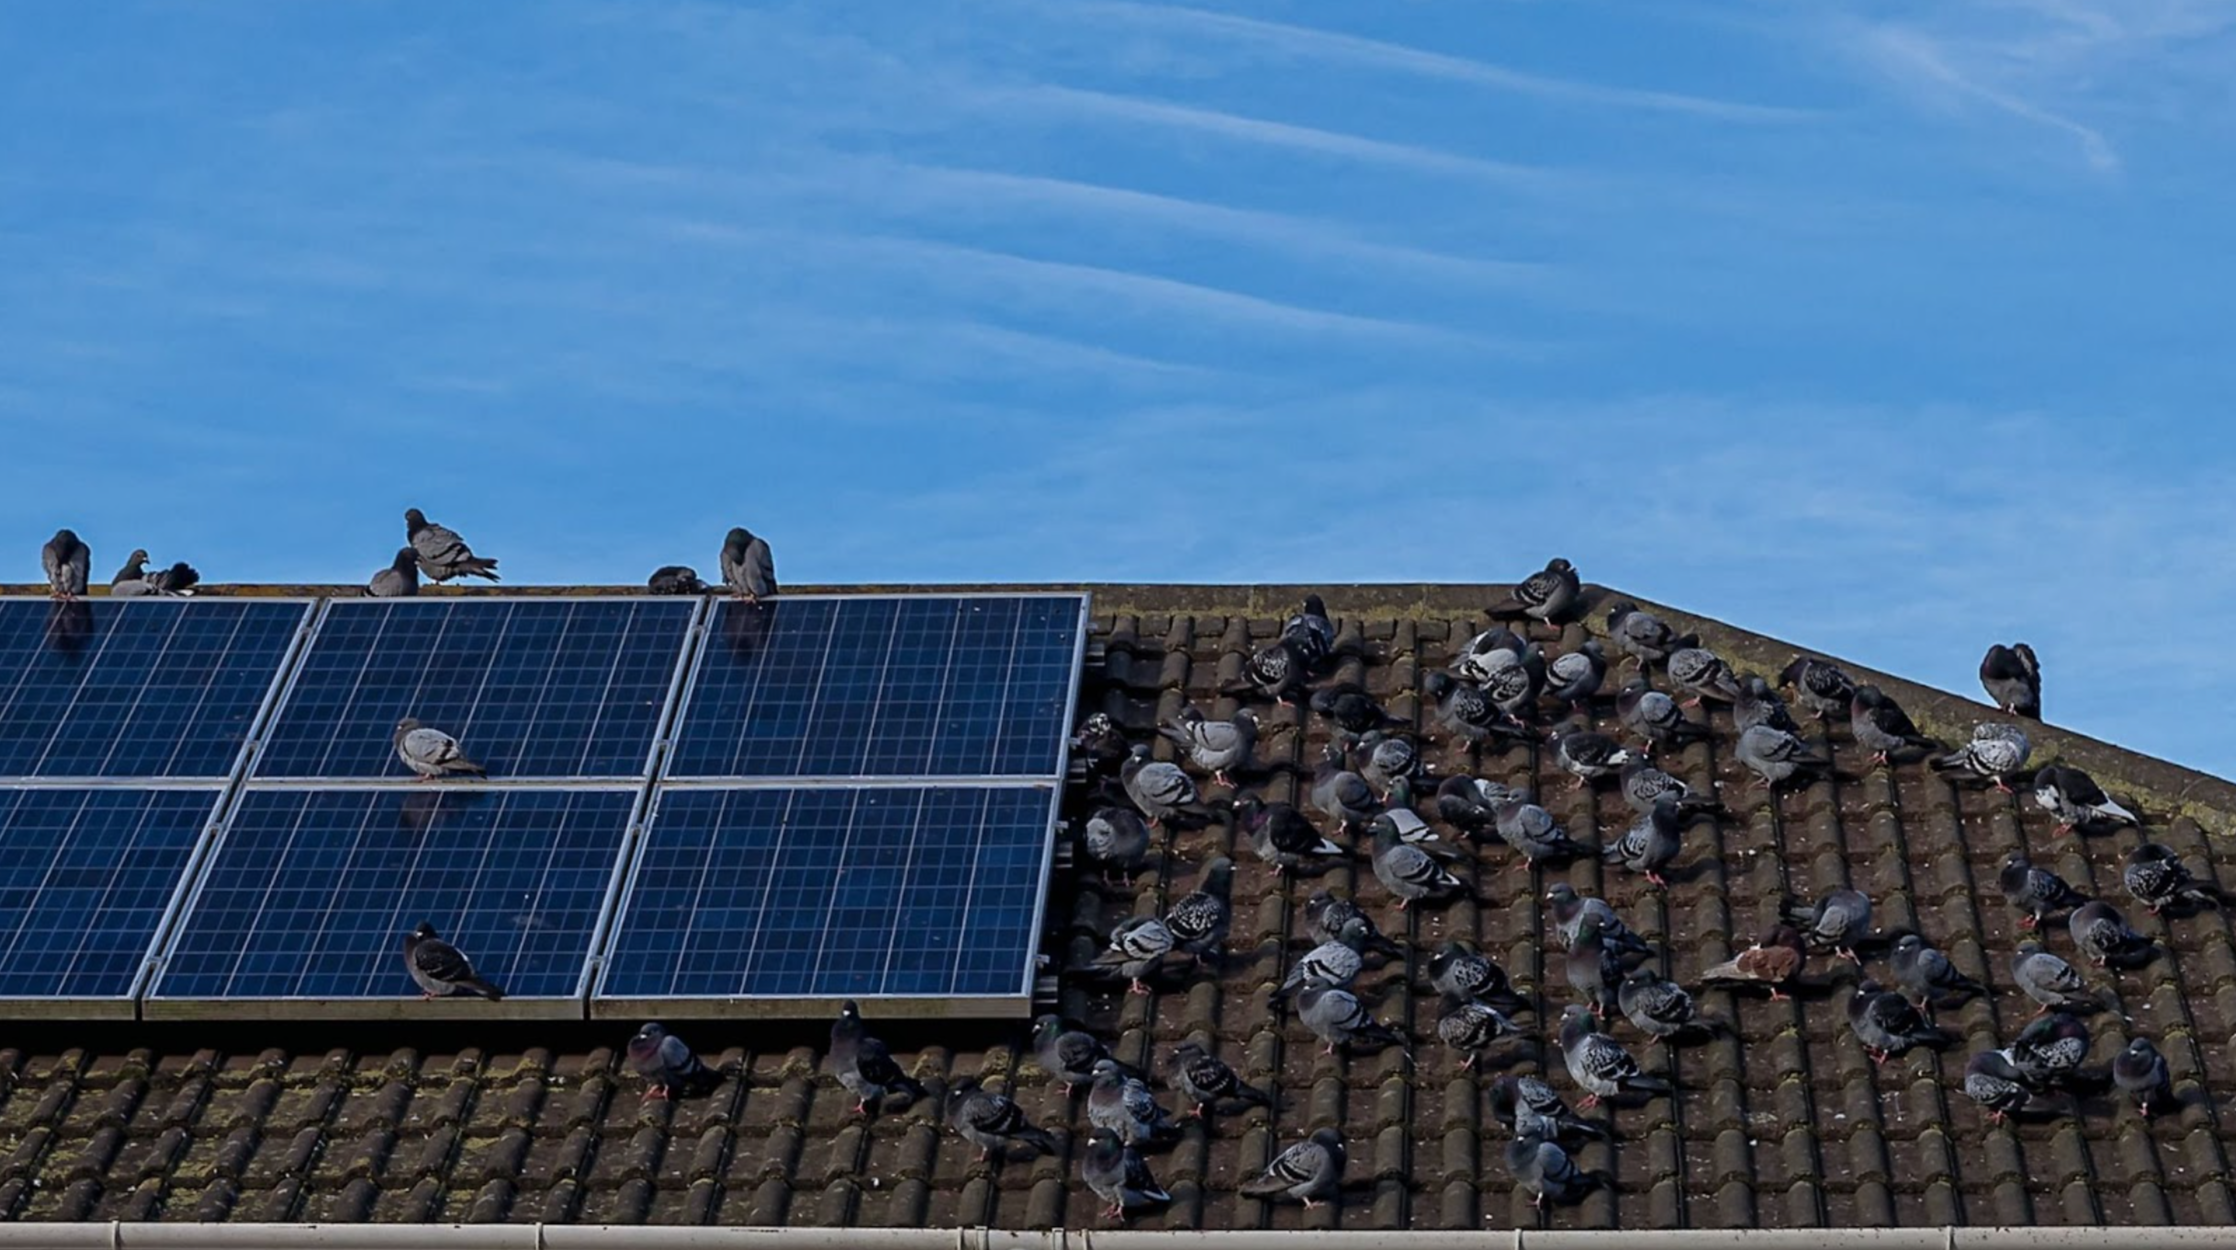 Solar Panels and Pigeons